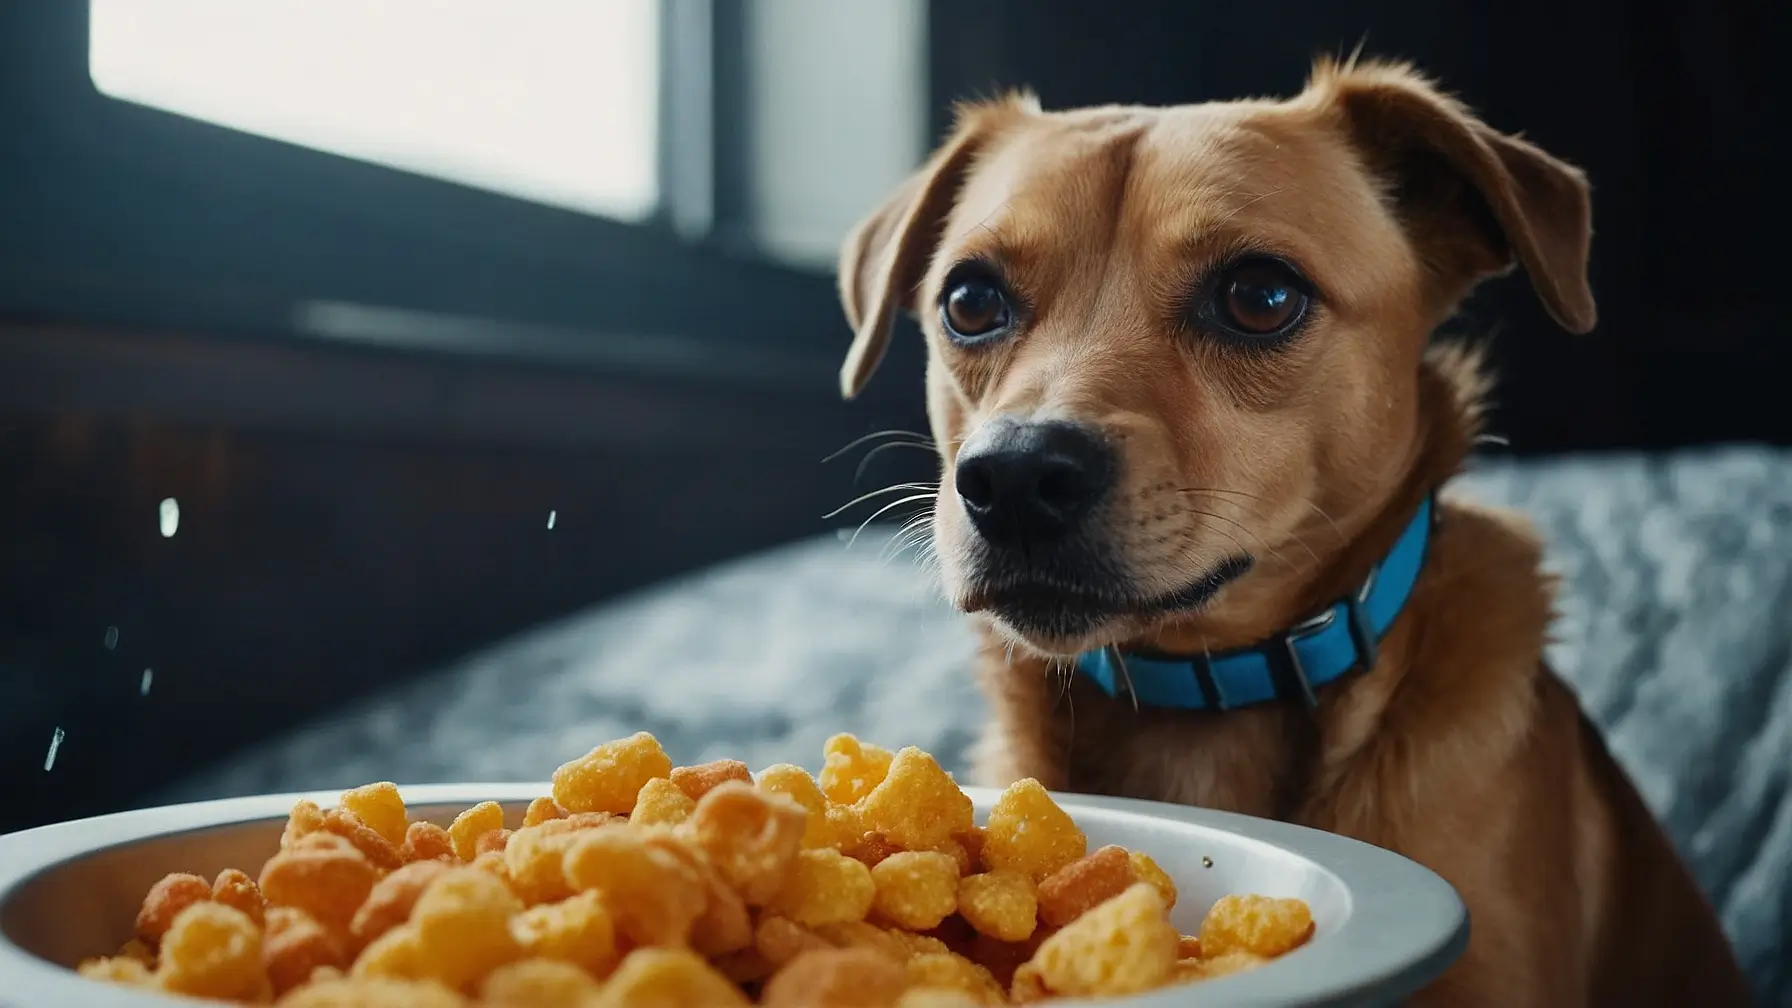 can dogs eat captain crunch?